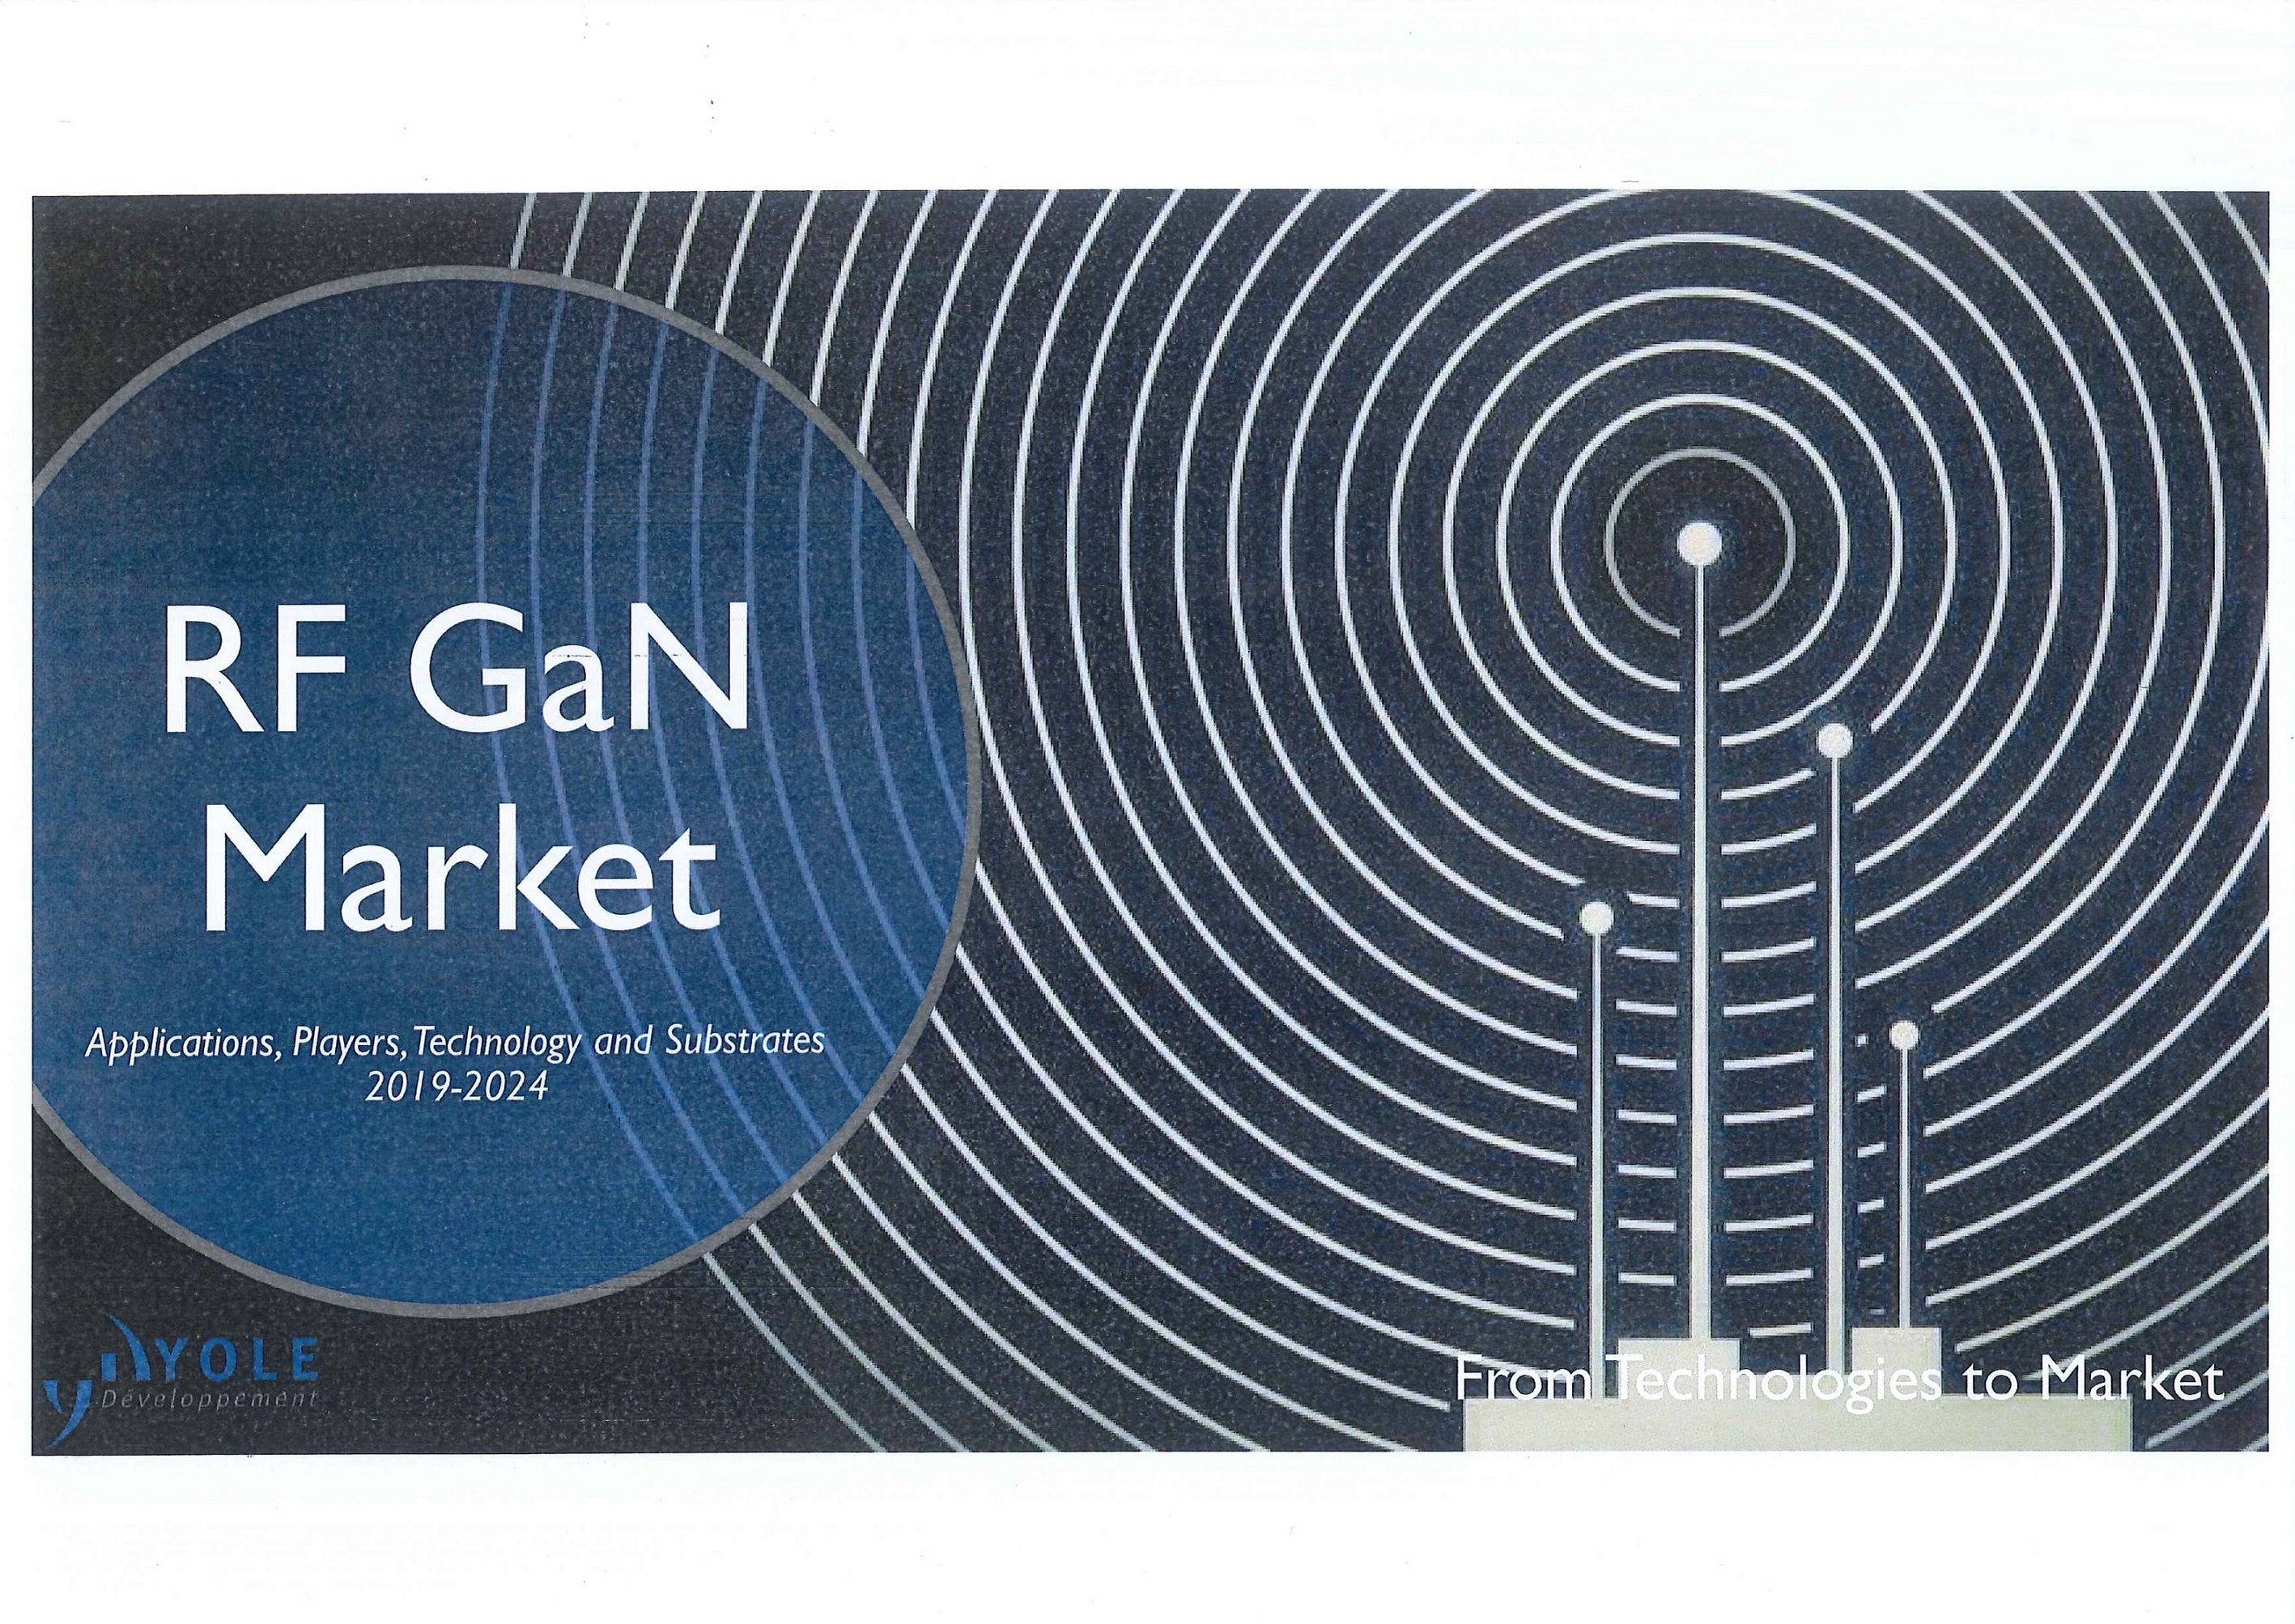 RF GaN market [e-book]:applications, players, technology and substrates 2019-2024:from technologies to market